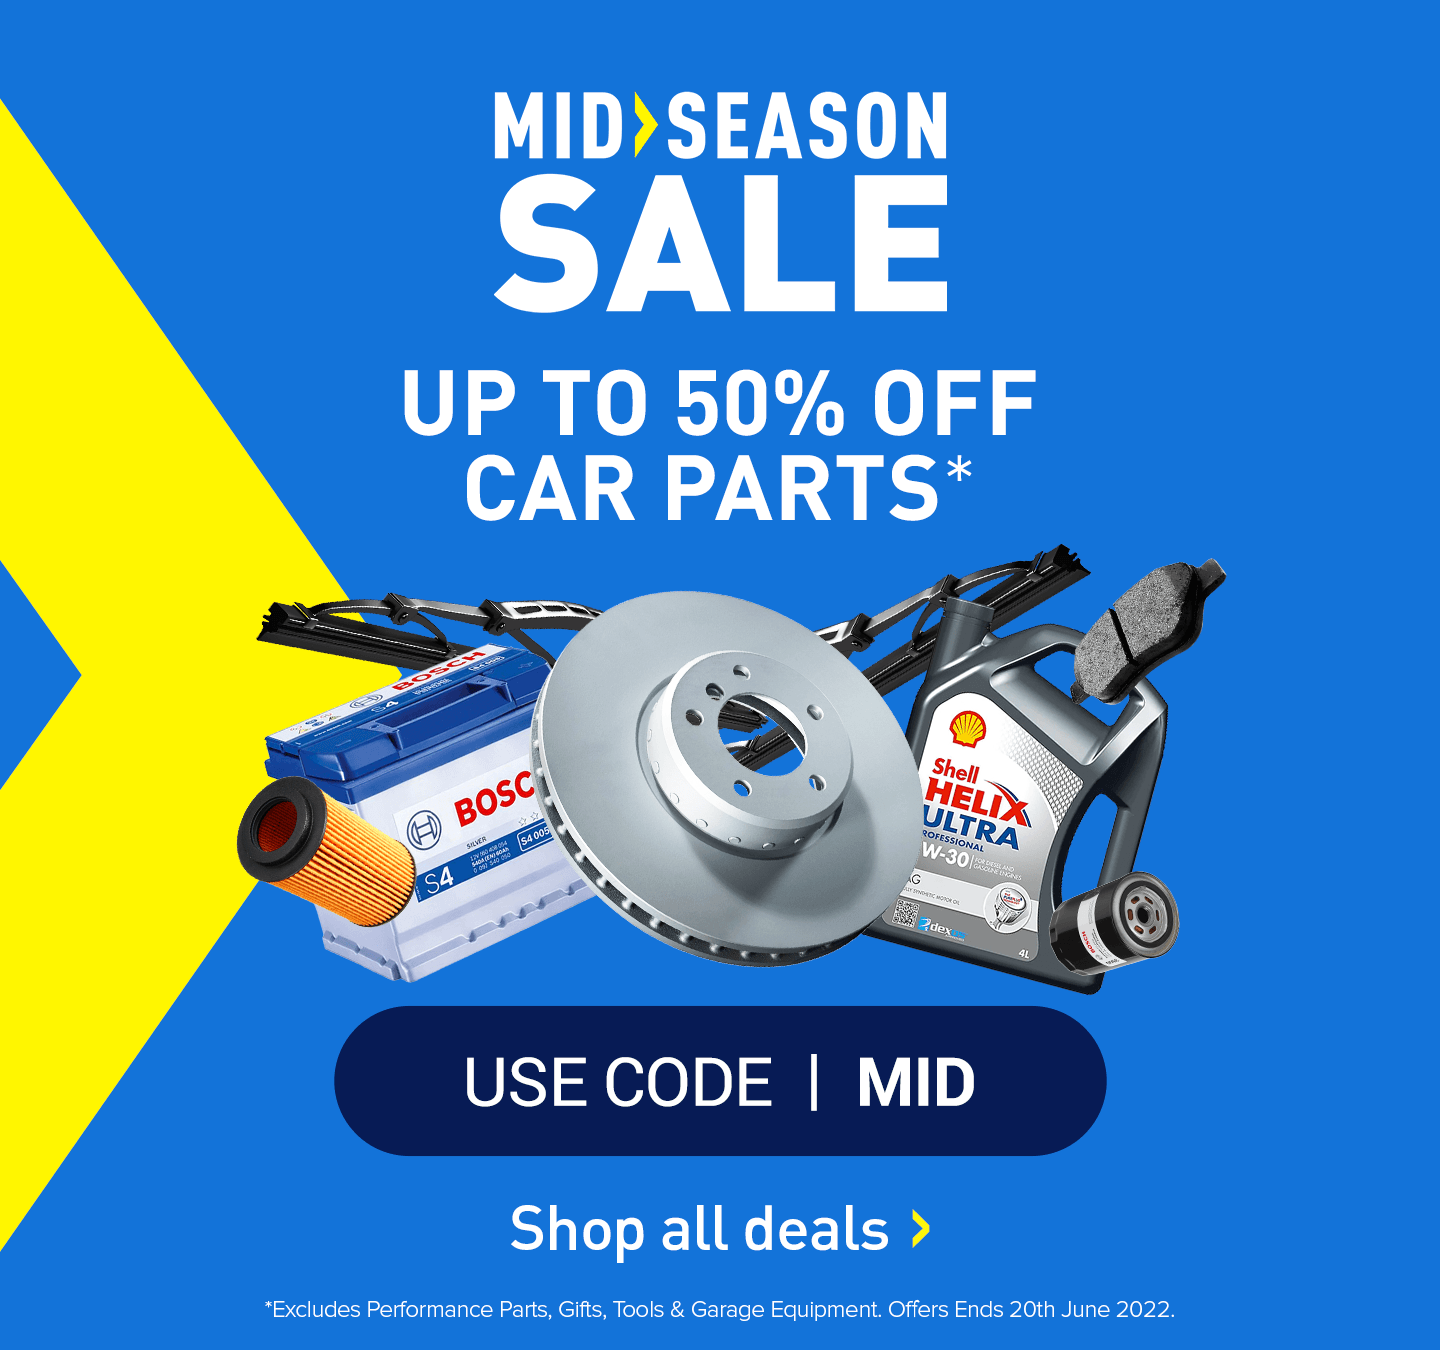 LIRS TR SALE DV Tege o CAR PARTS g S O Oy % Shop all deals *Excludes Performance Parts, Gifts, Tools Garage Equipment. Offers Ends 20th June 2022. 